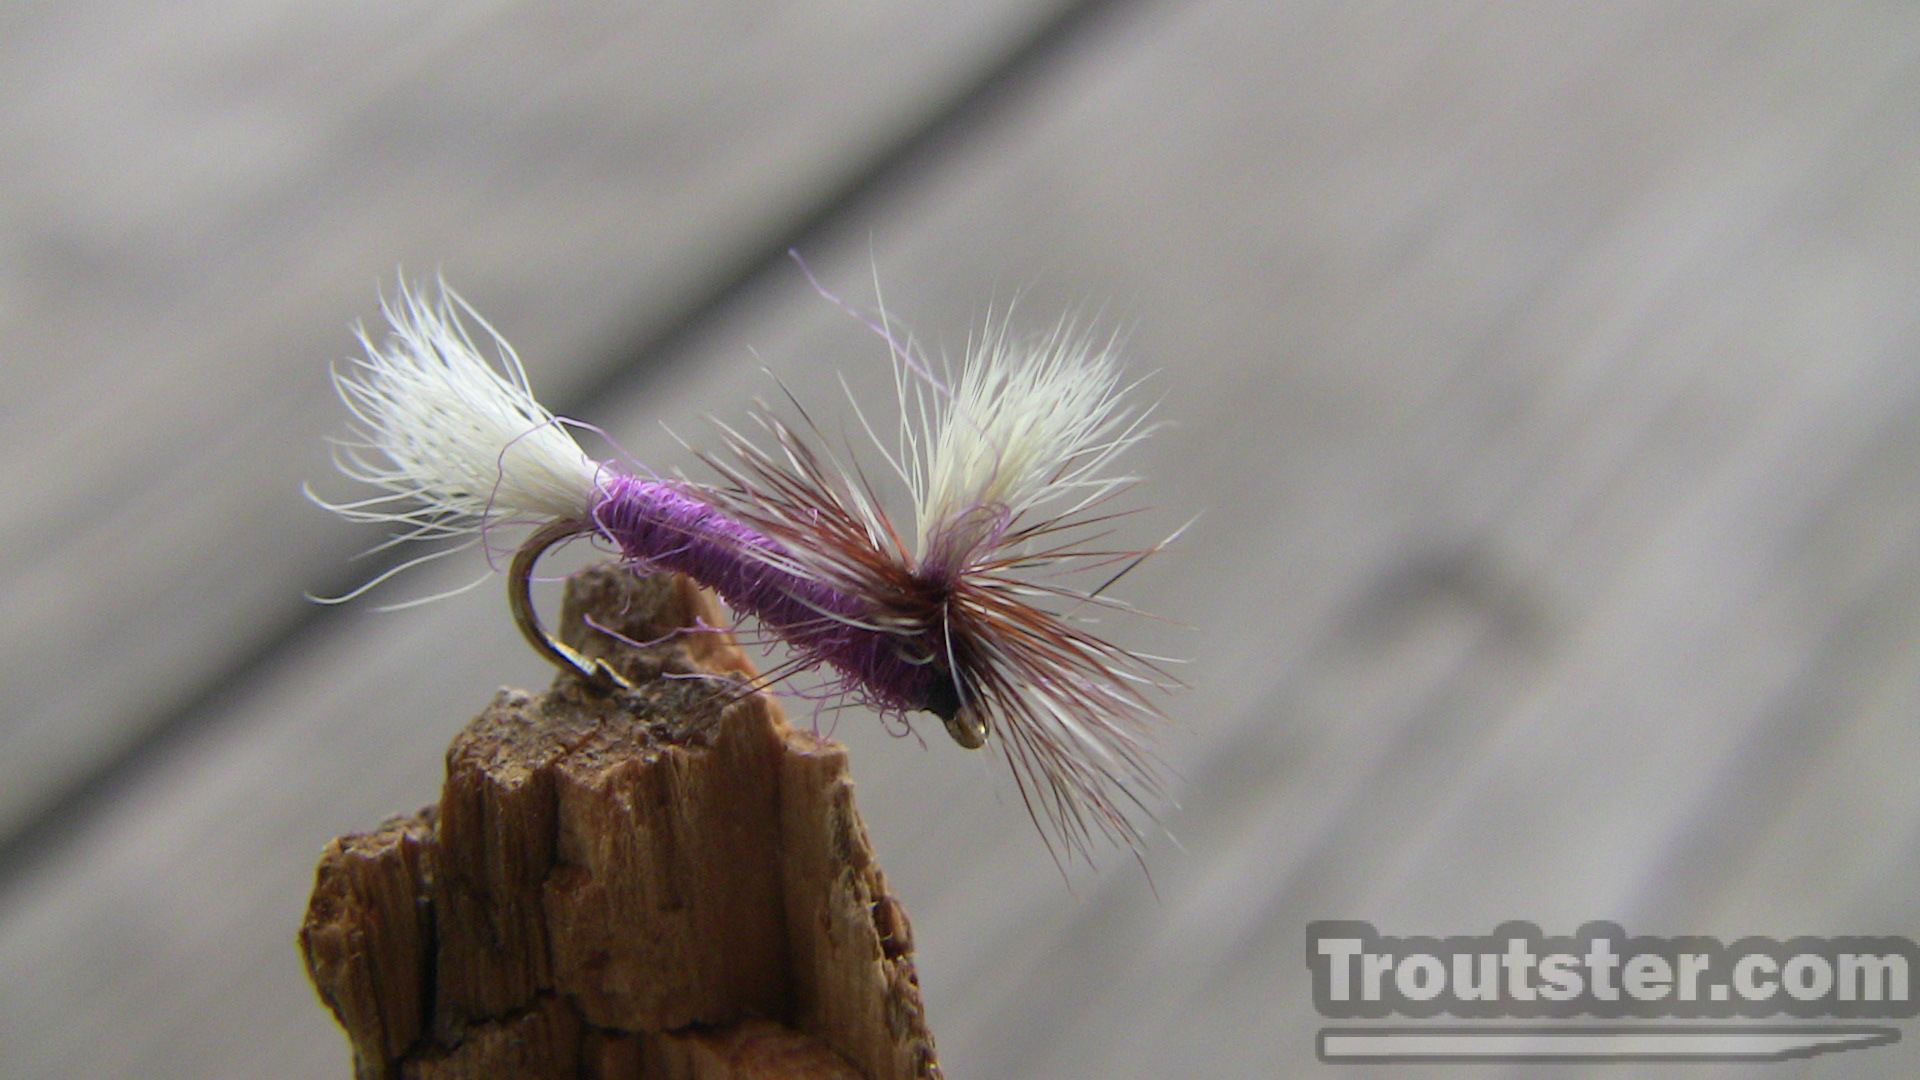 The purple haze fly tied with purple dubbing and calf hair parachute